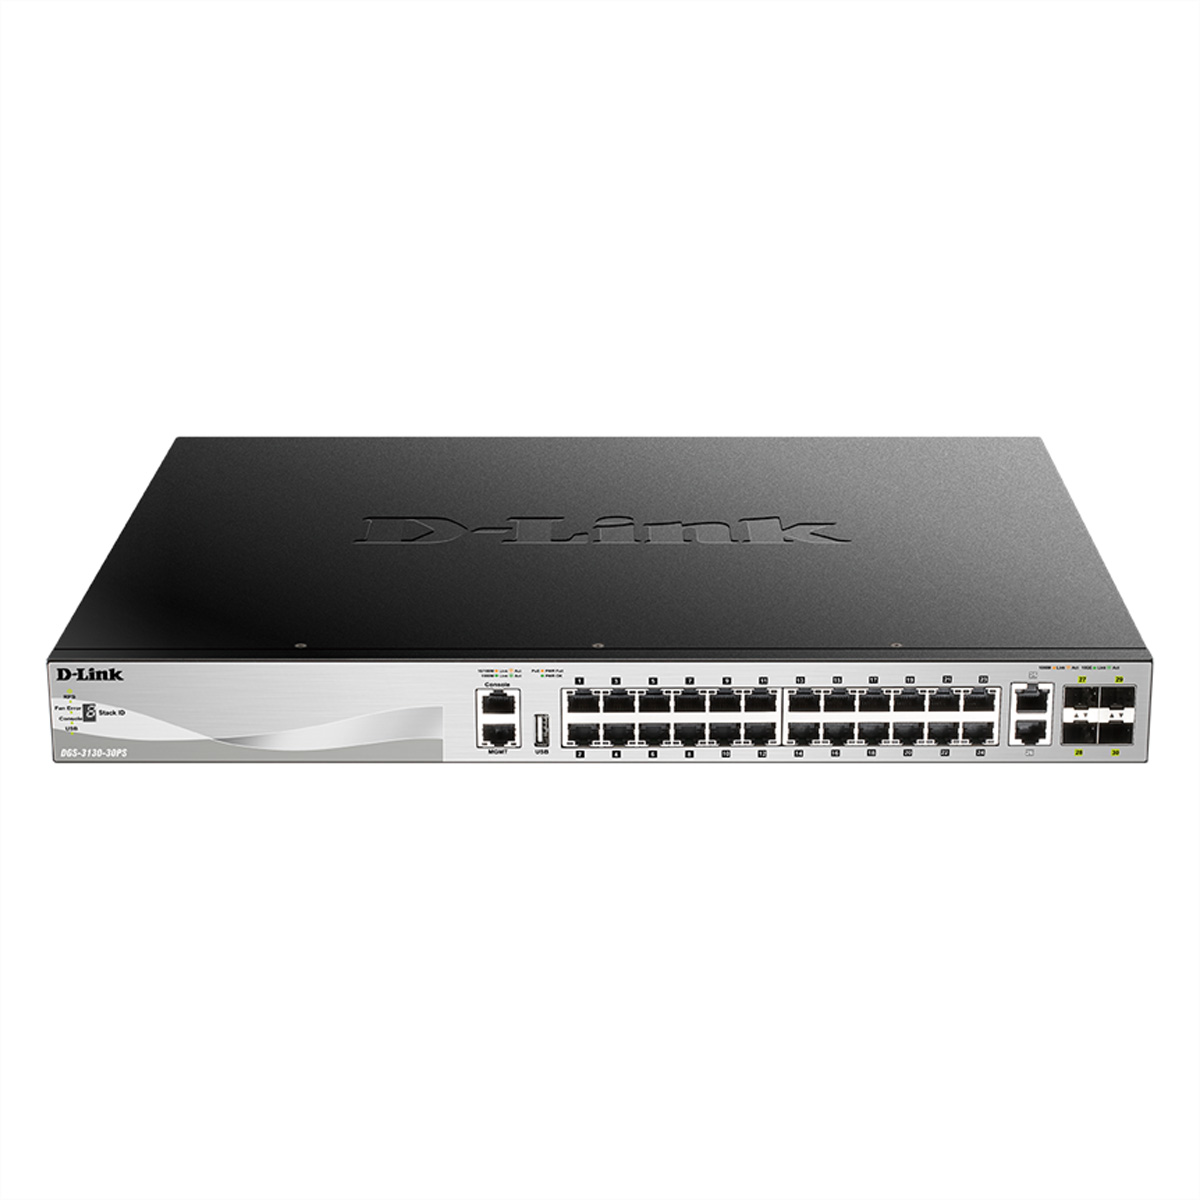 D-Link DGS-3130-30PS/E 30Port PoE Switch, Layer 3 PoE Gigabit Stack (SI)